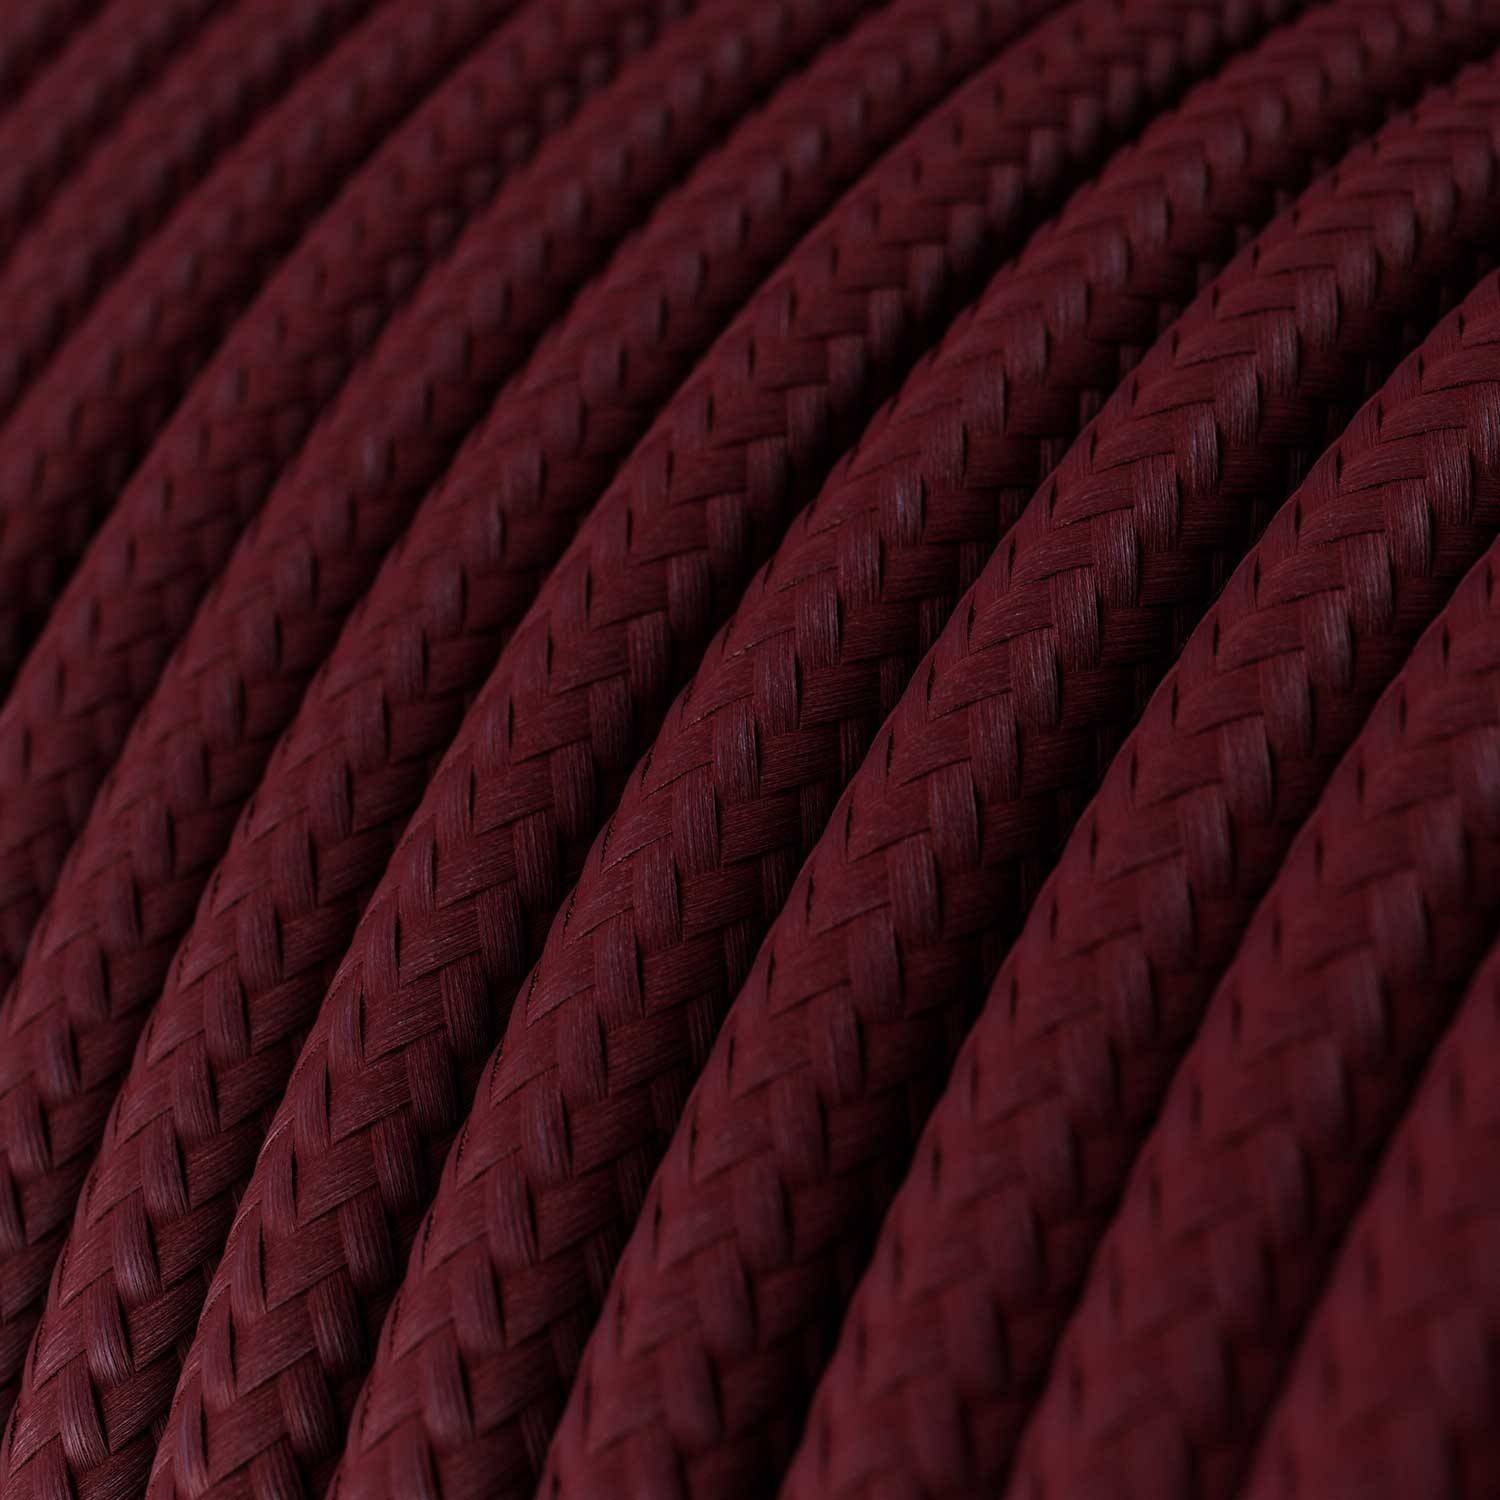 Glossy Bordeaux textile cable - The Original Creative-Cables - RM19 round 2x0.75mm / 3x0.75mm